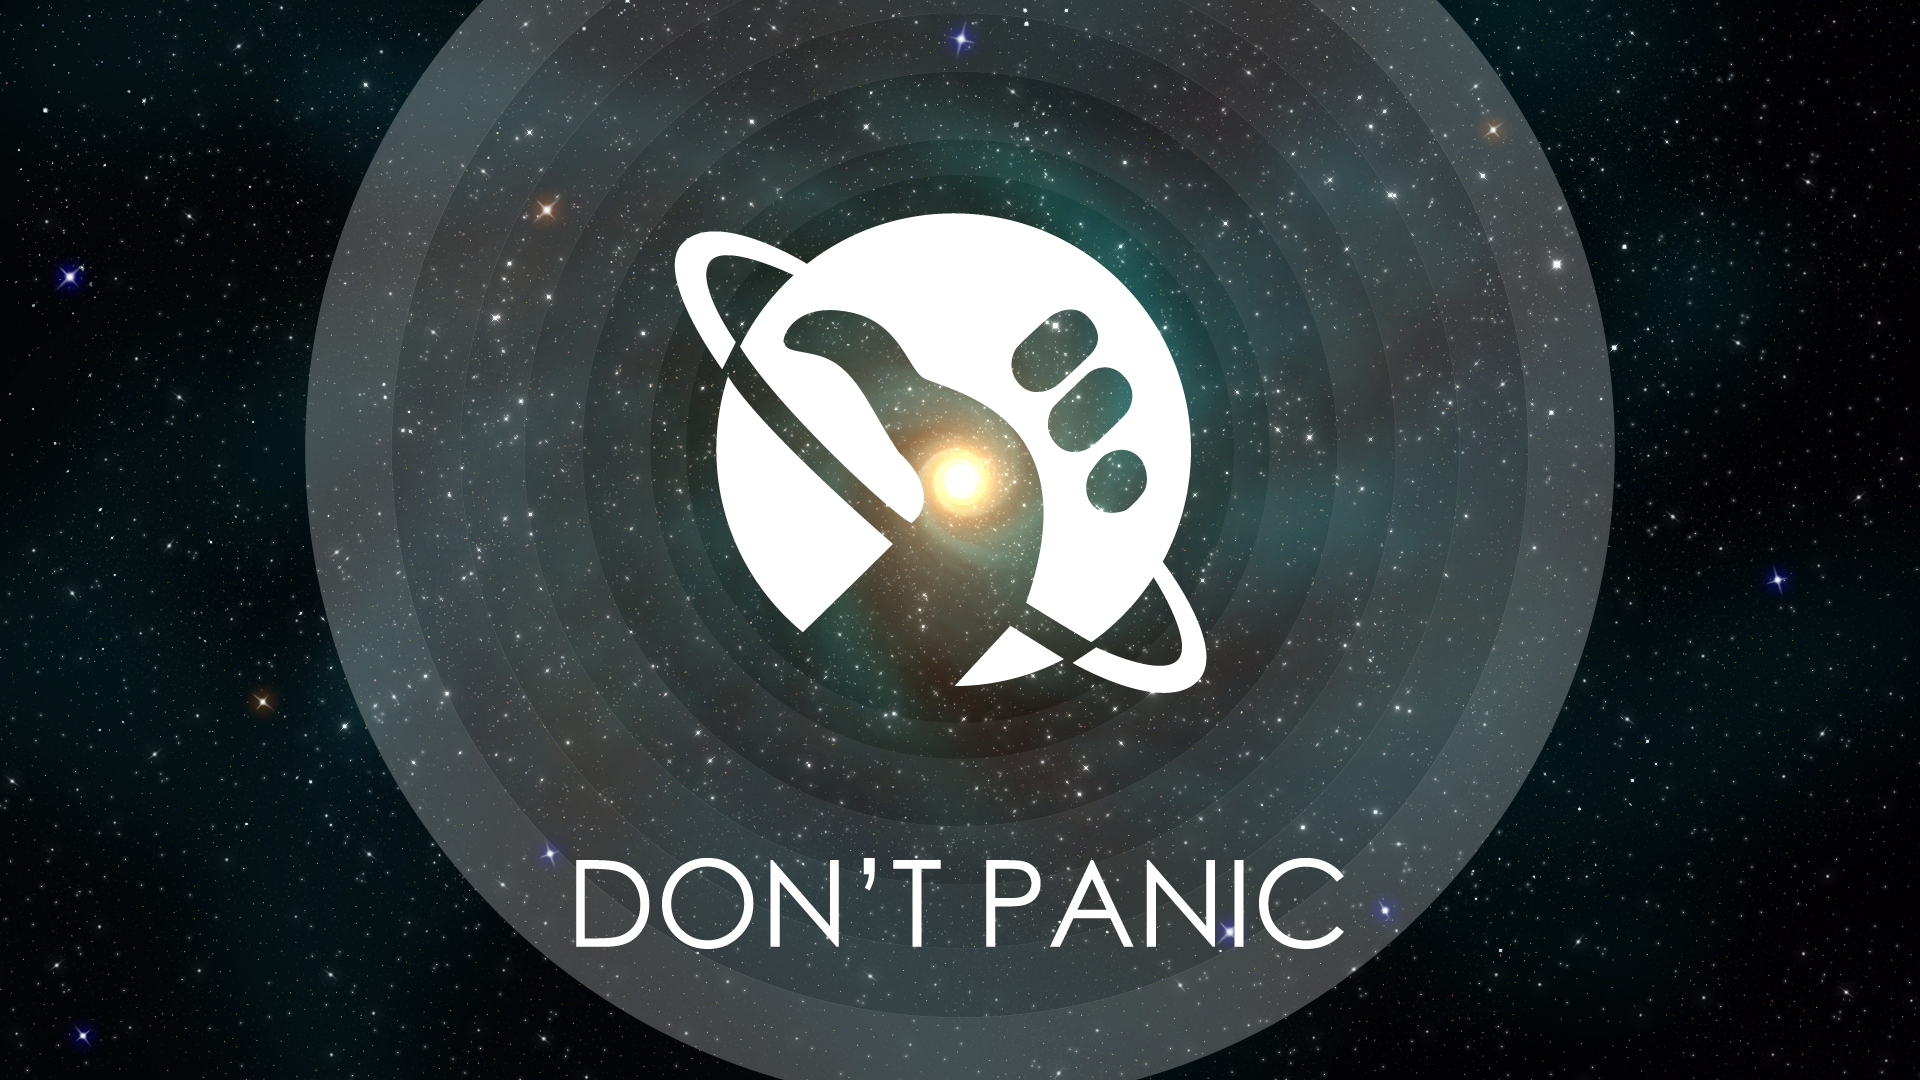 General 1920x1080 The Hitchhiker's Guide to the Galaxy logo science fiction books